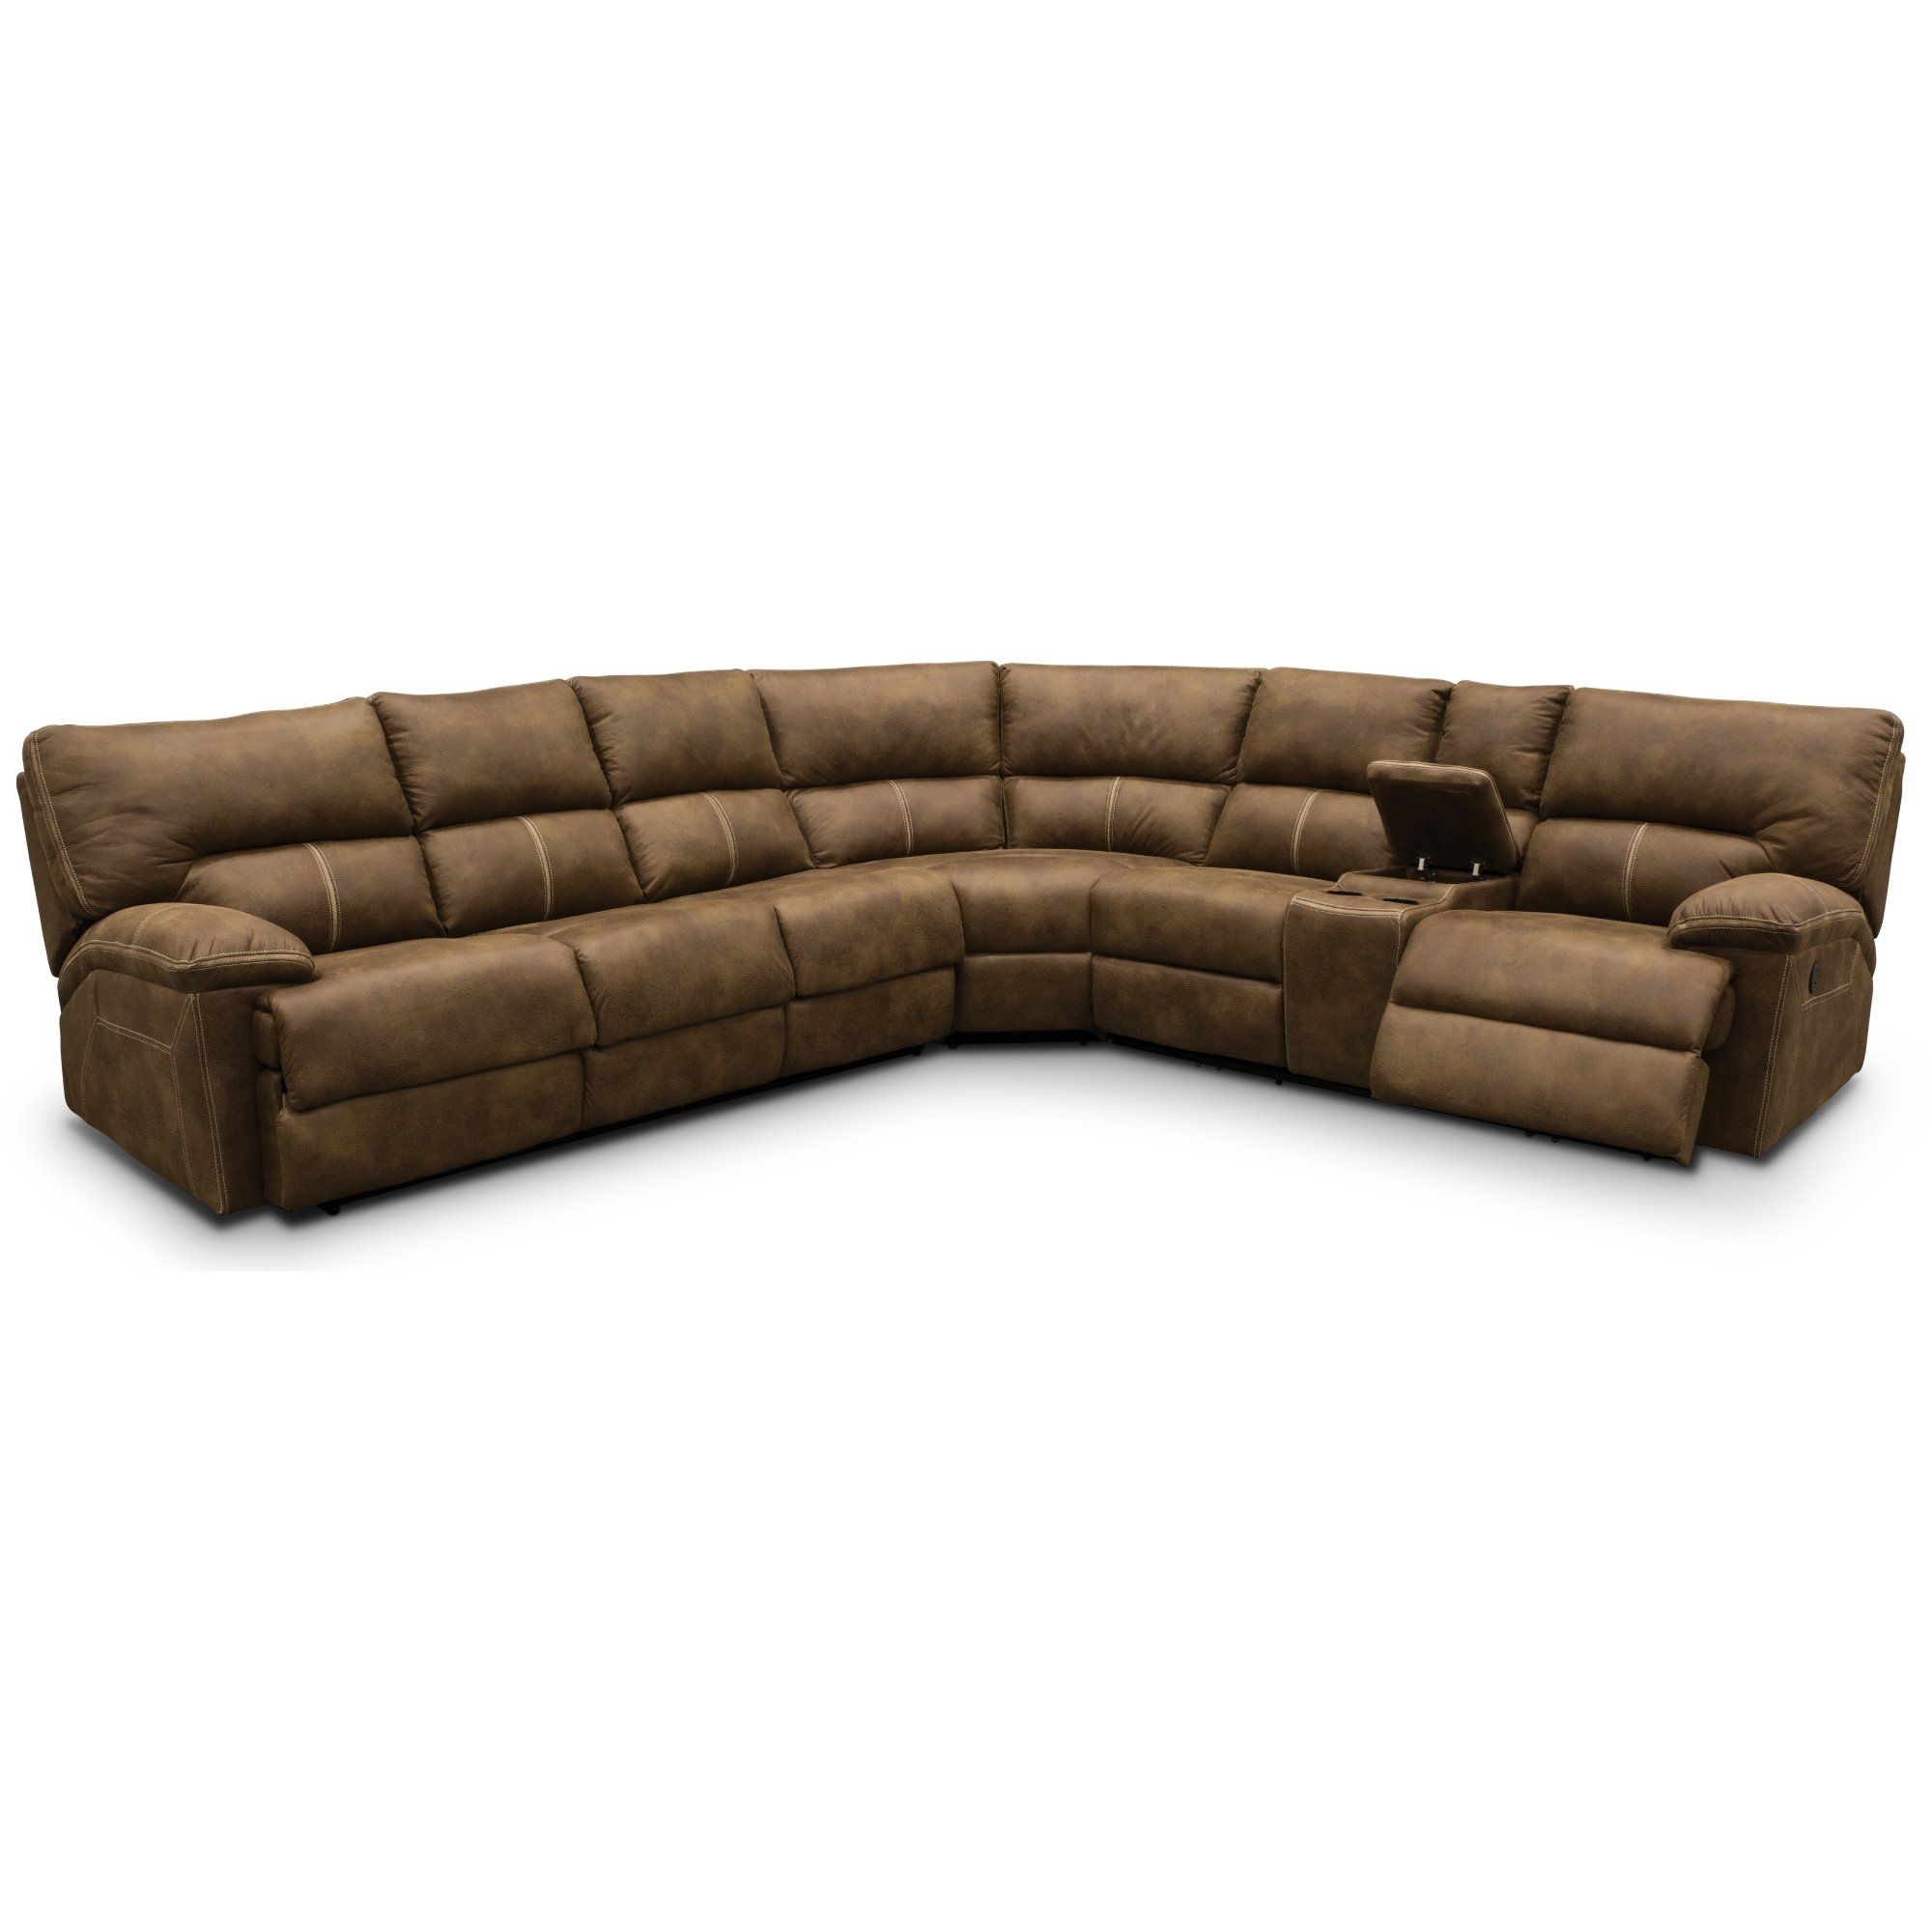 3 Piece Sectional Sofa With Recliner | Thesofasite (View 18 of 20)